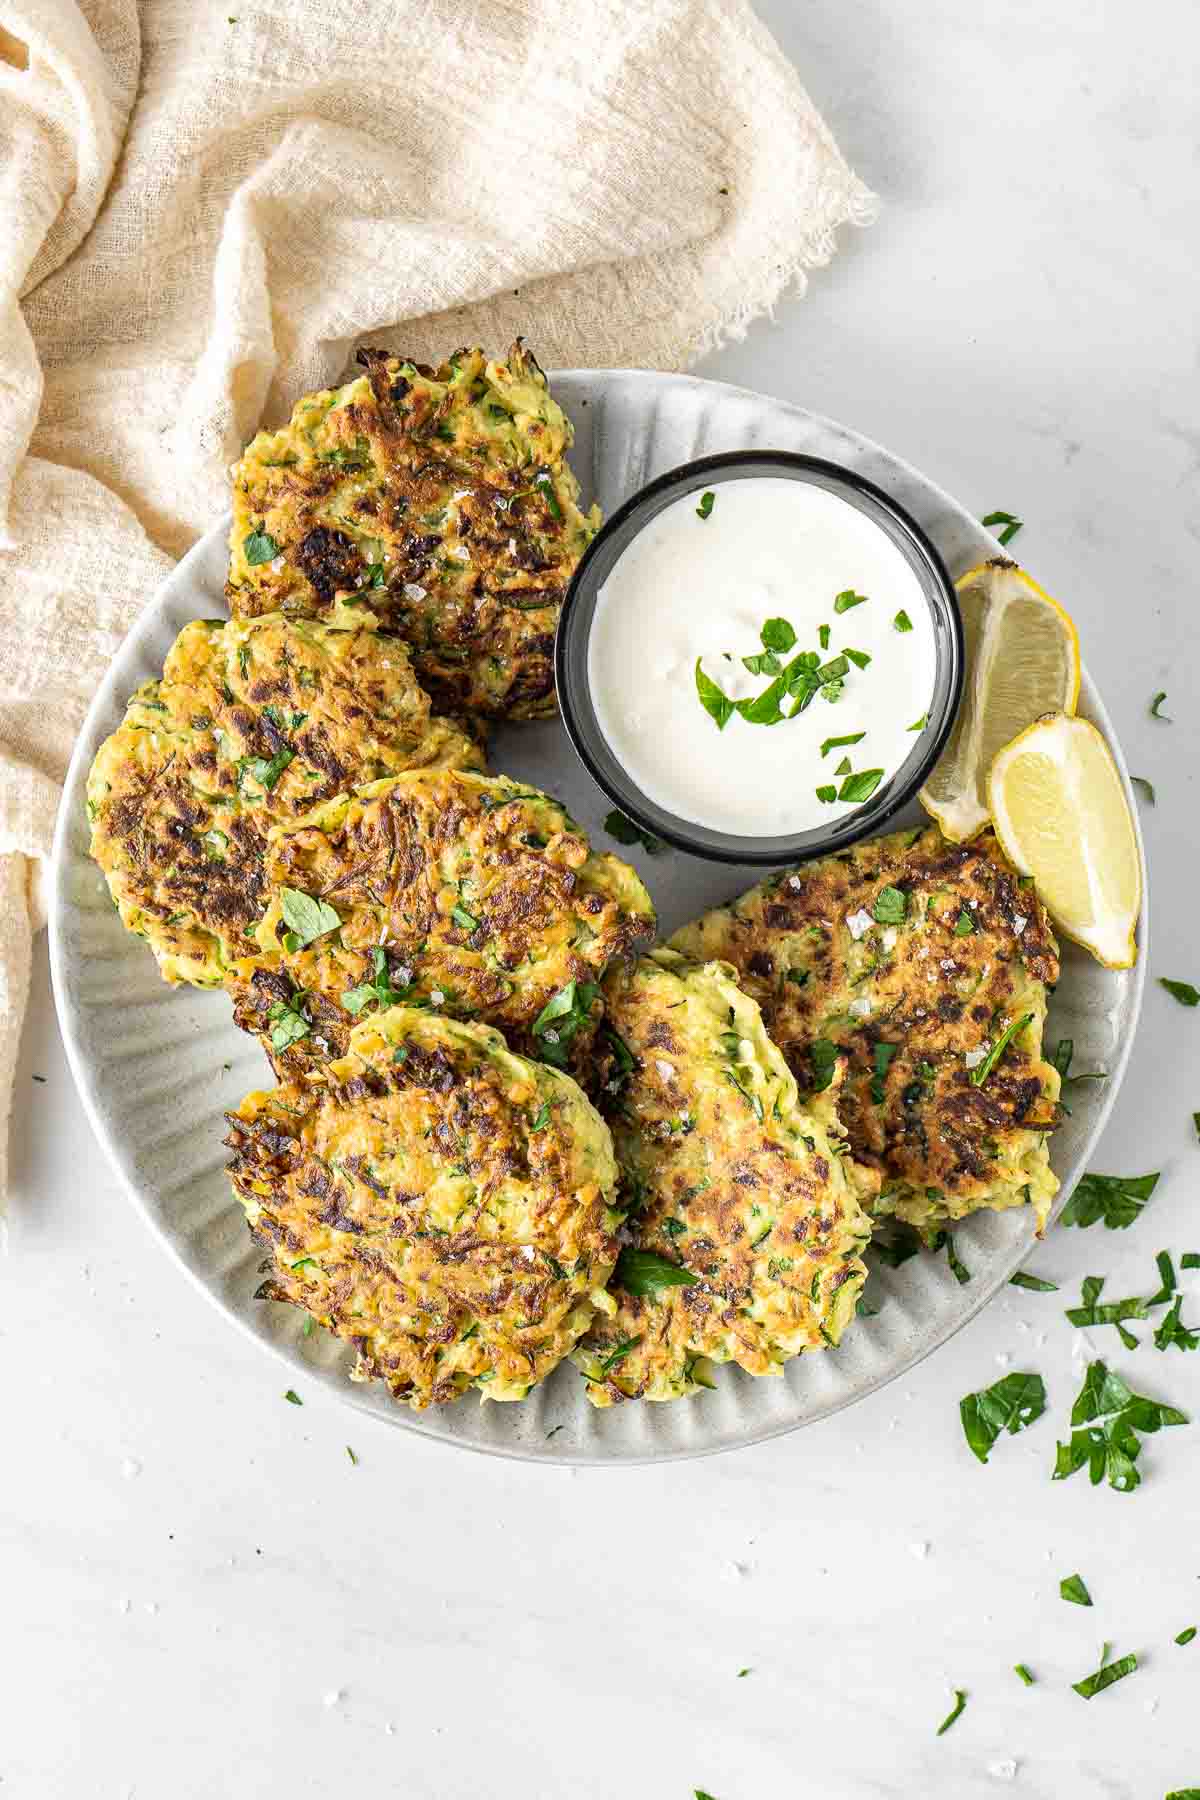 Zucchini fritters on a plate with sauce and lemon.